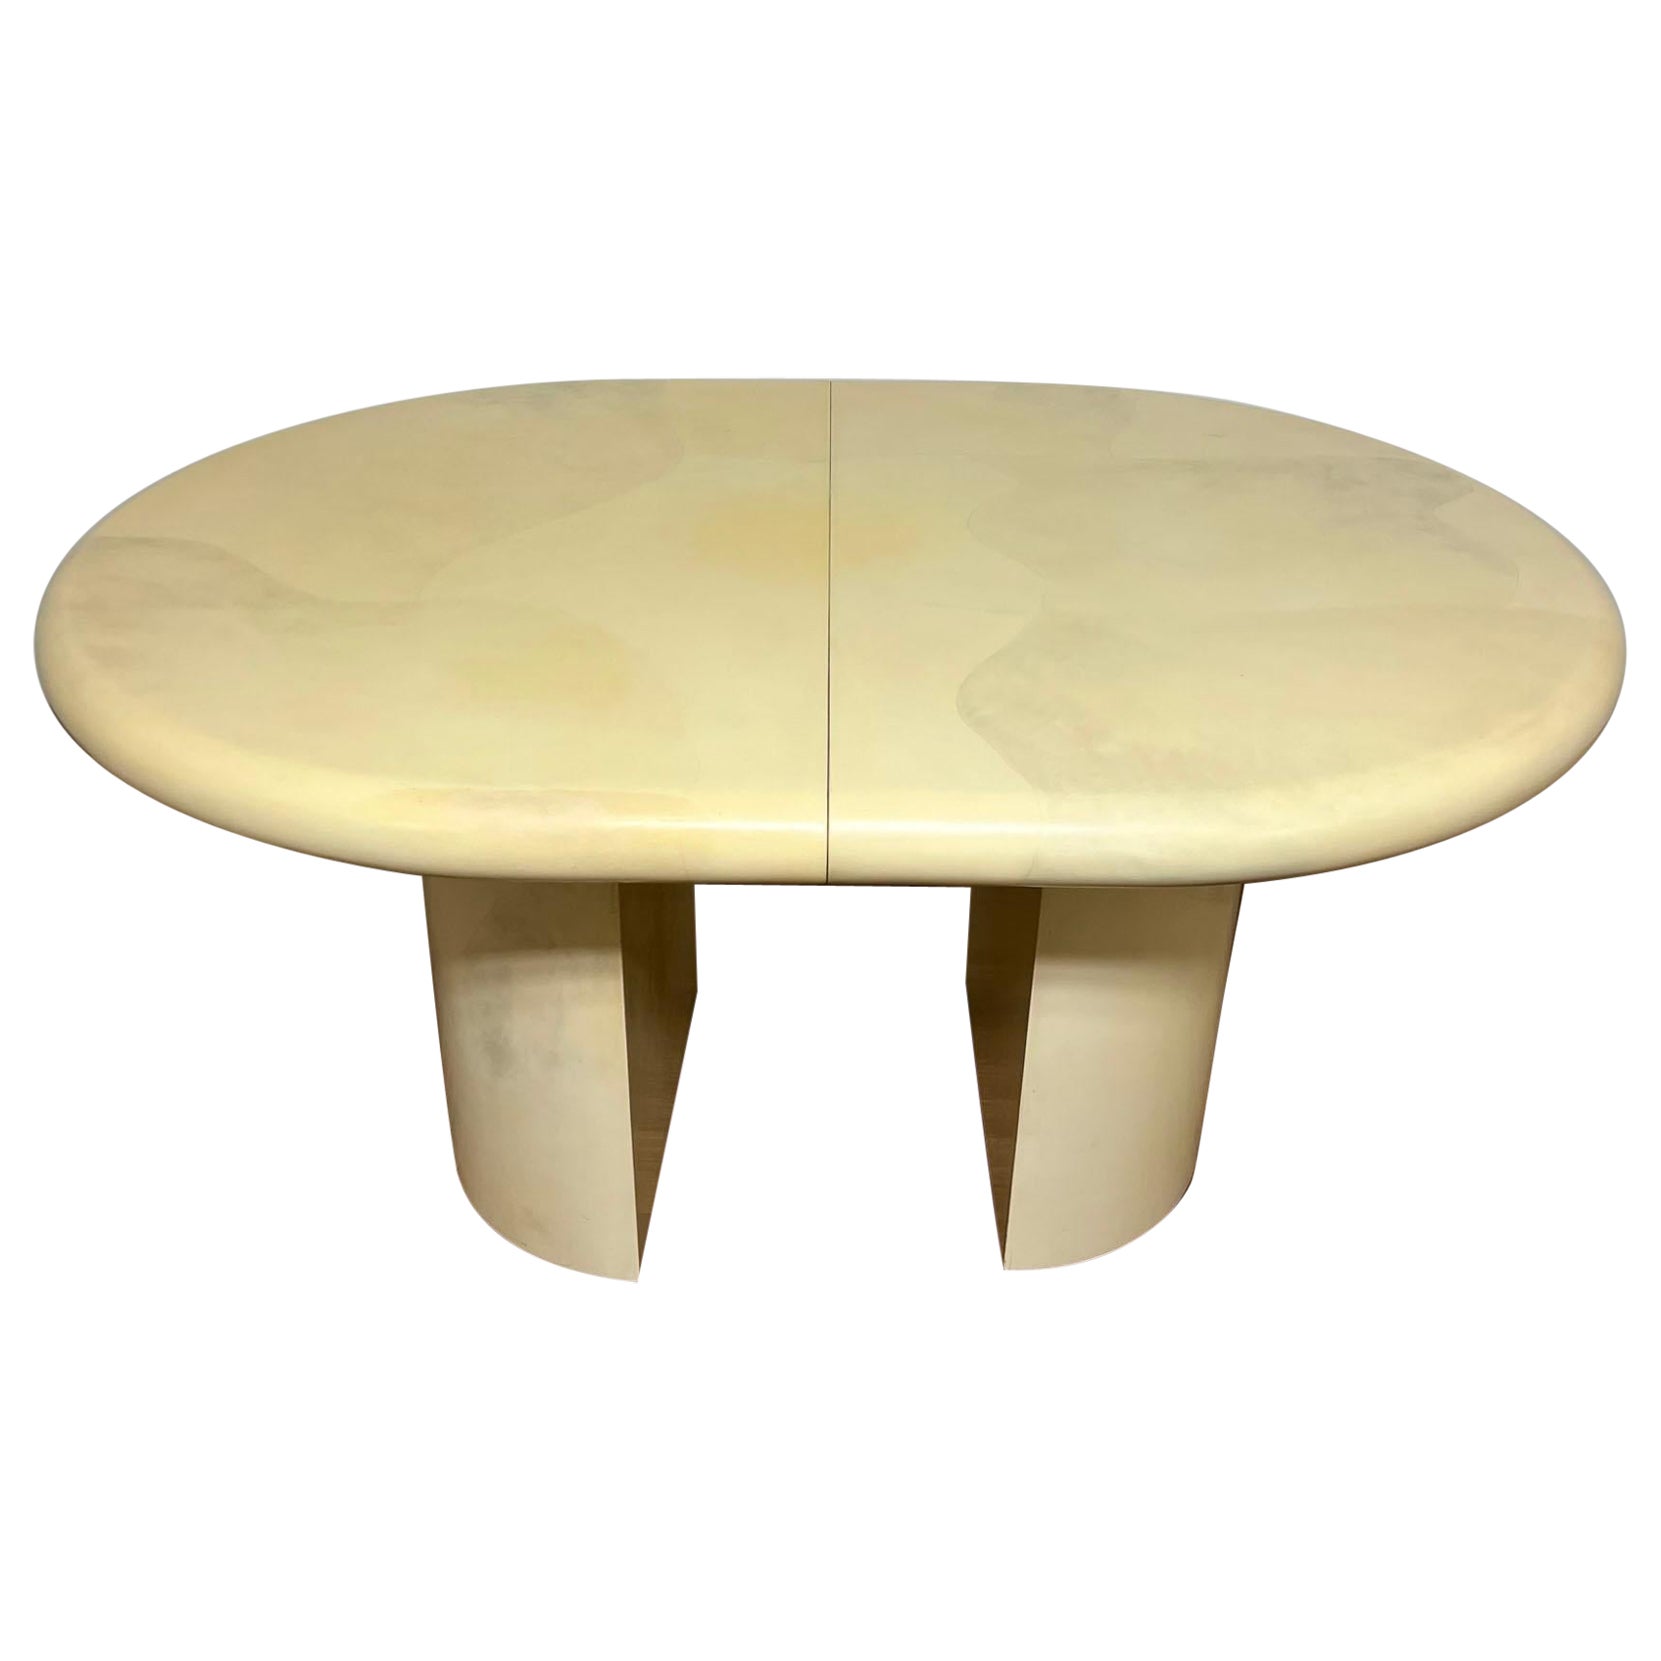 Faux Goat Skin Lacquered Dining Table With Two Leaves, Circa 1980s For Sale